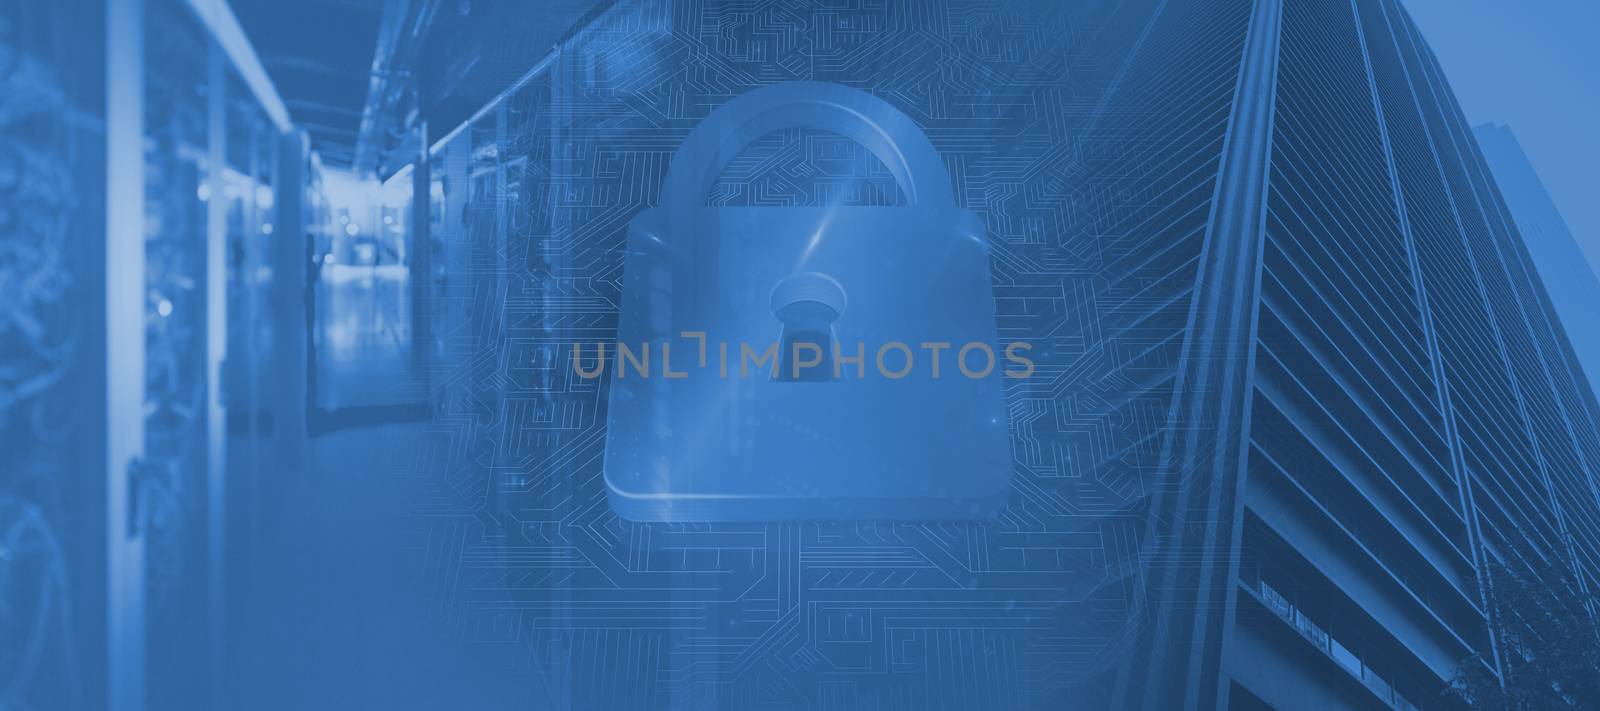 Lock on blue circuit background against view of data technology